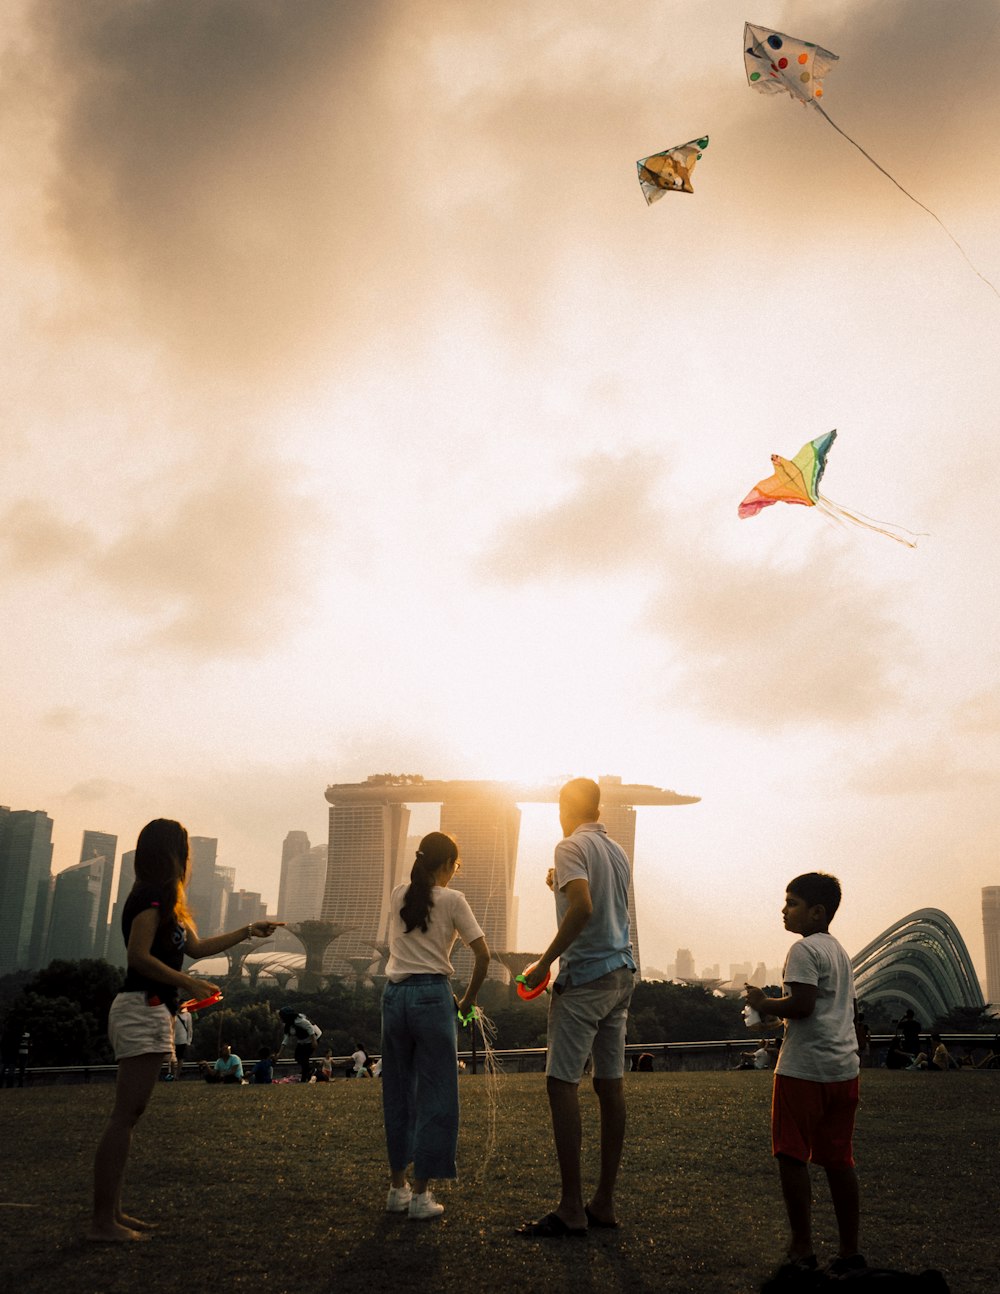 four person playing kite on grass field